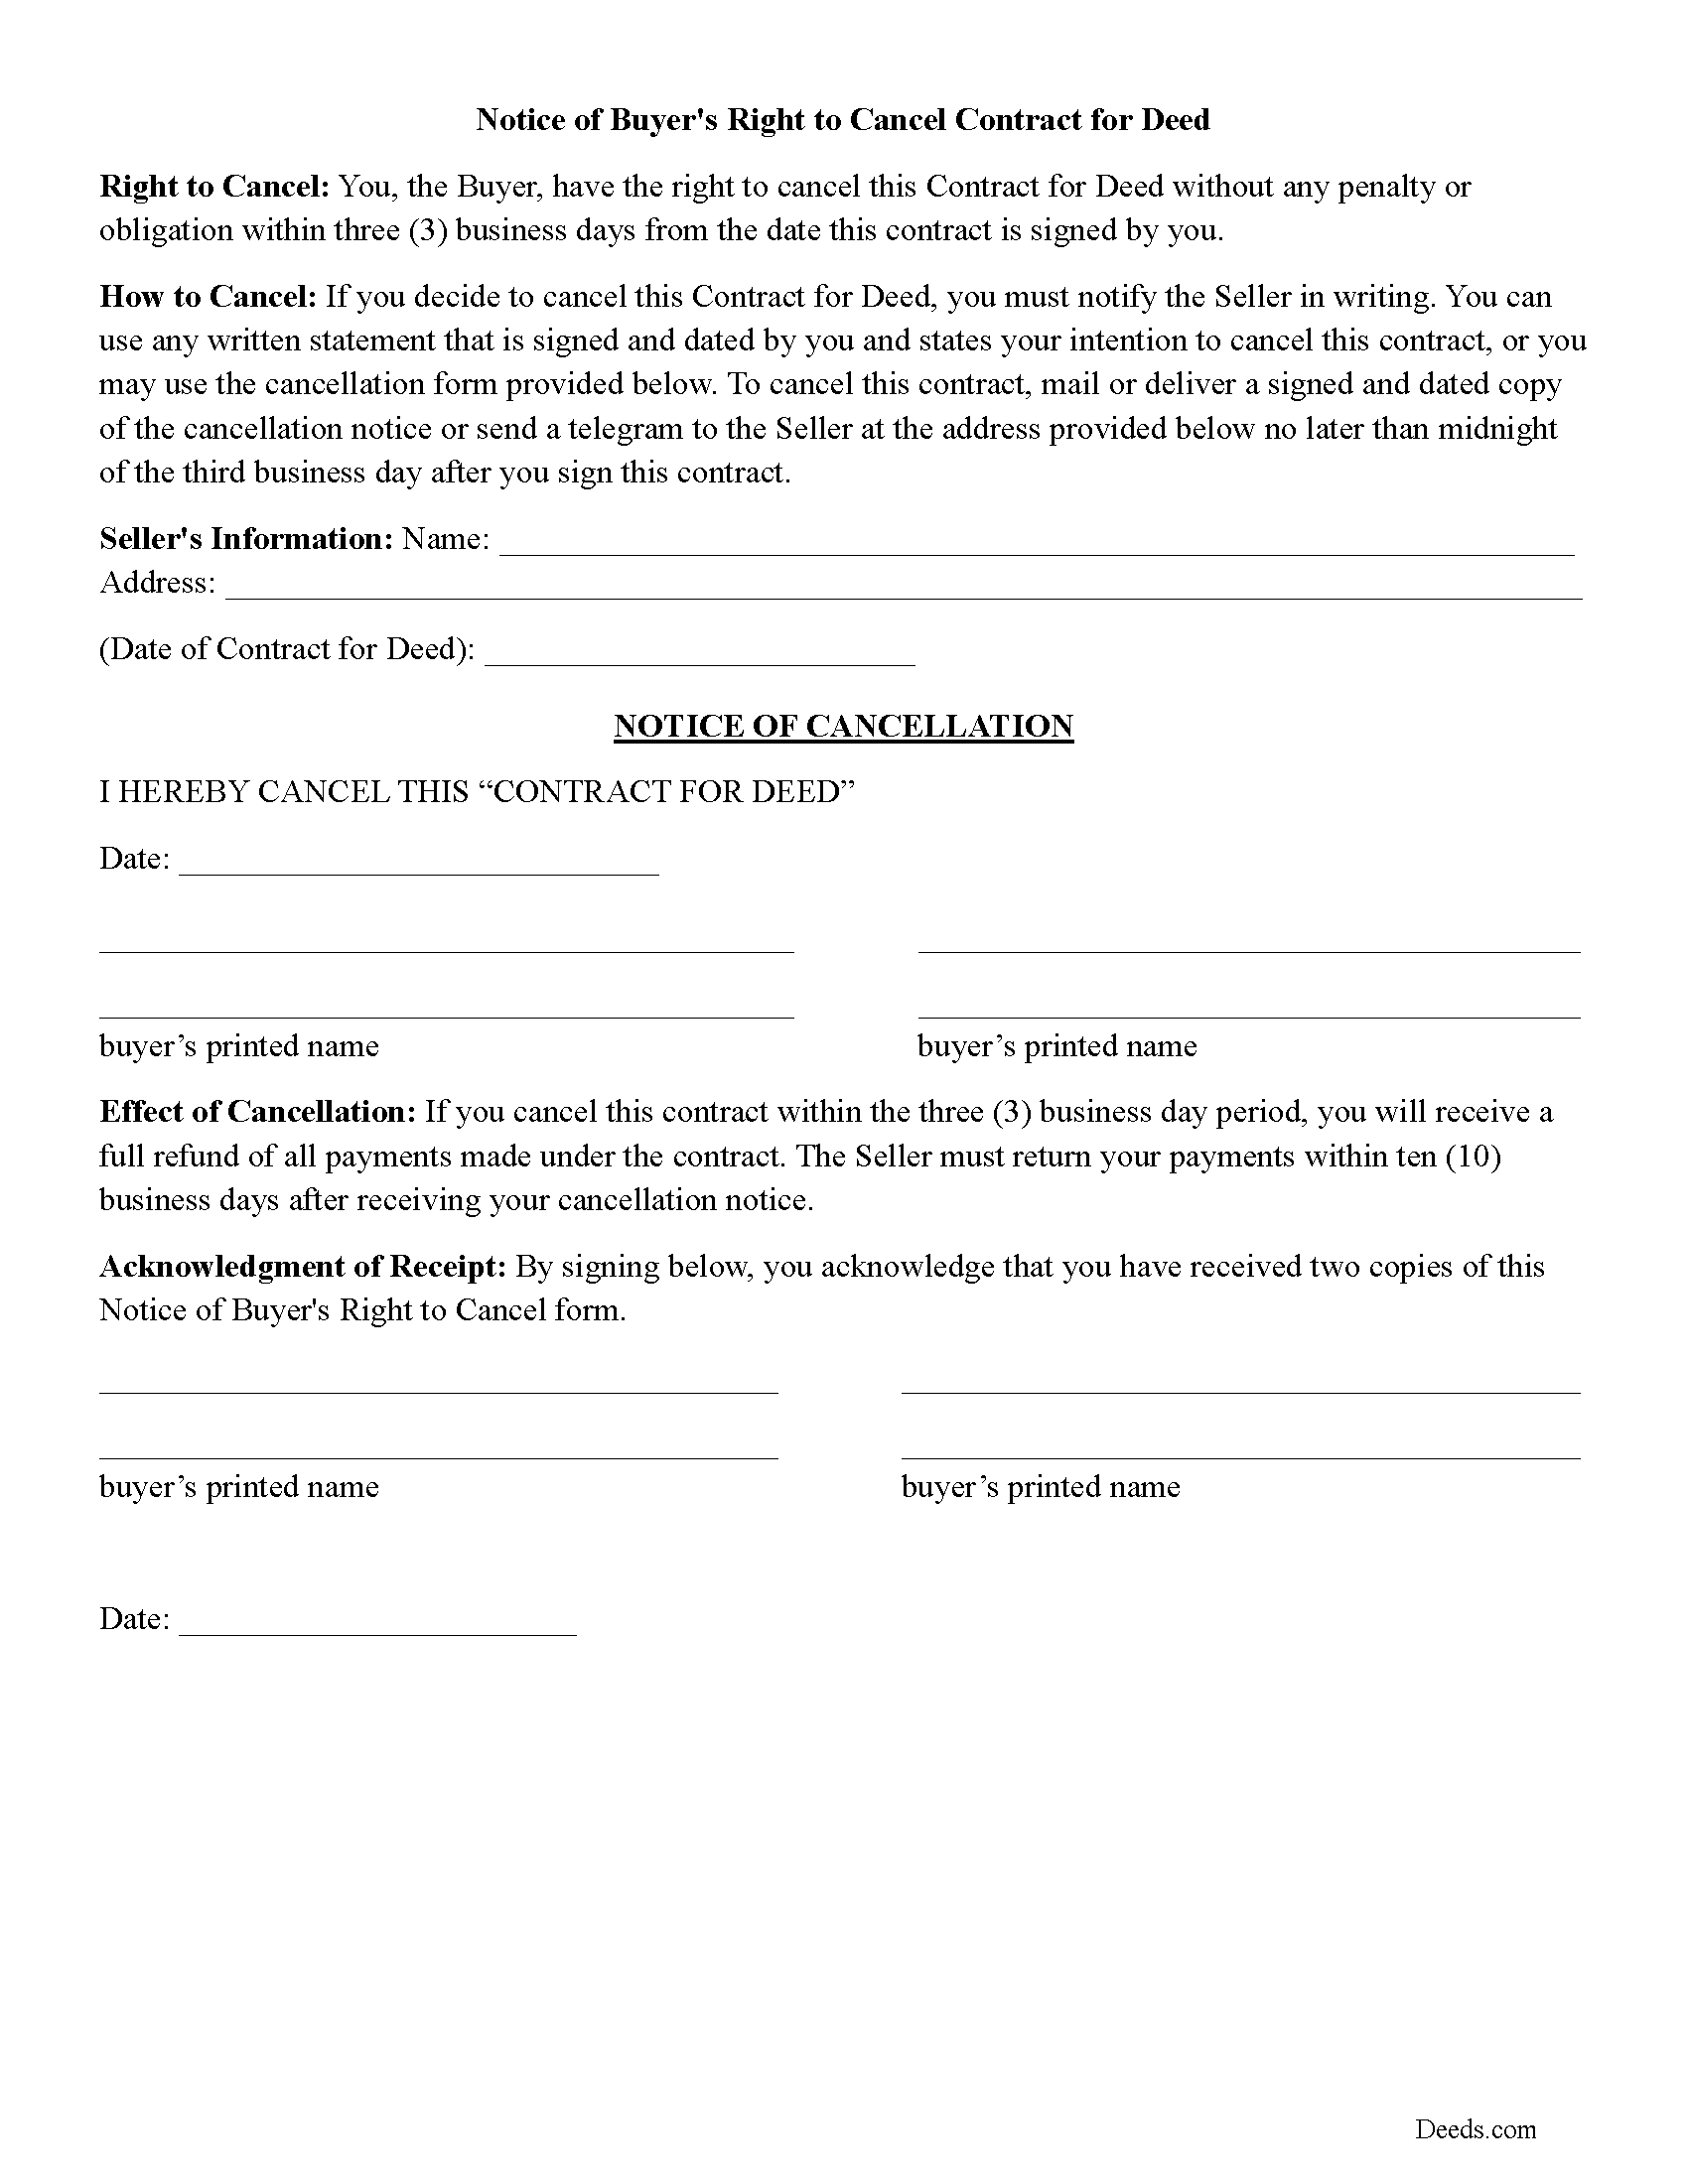 Jackson County 3-day Cancellation Notice Form